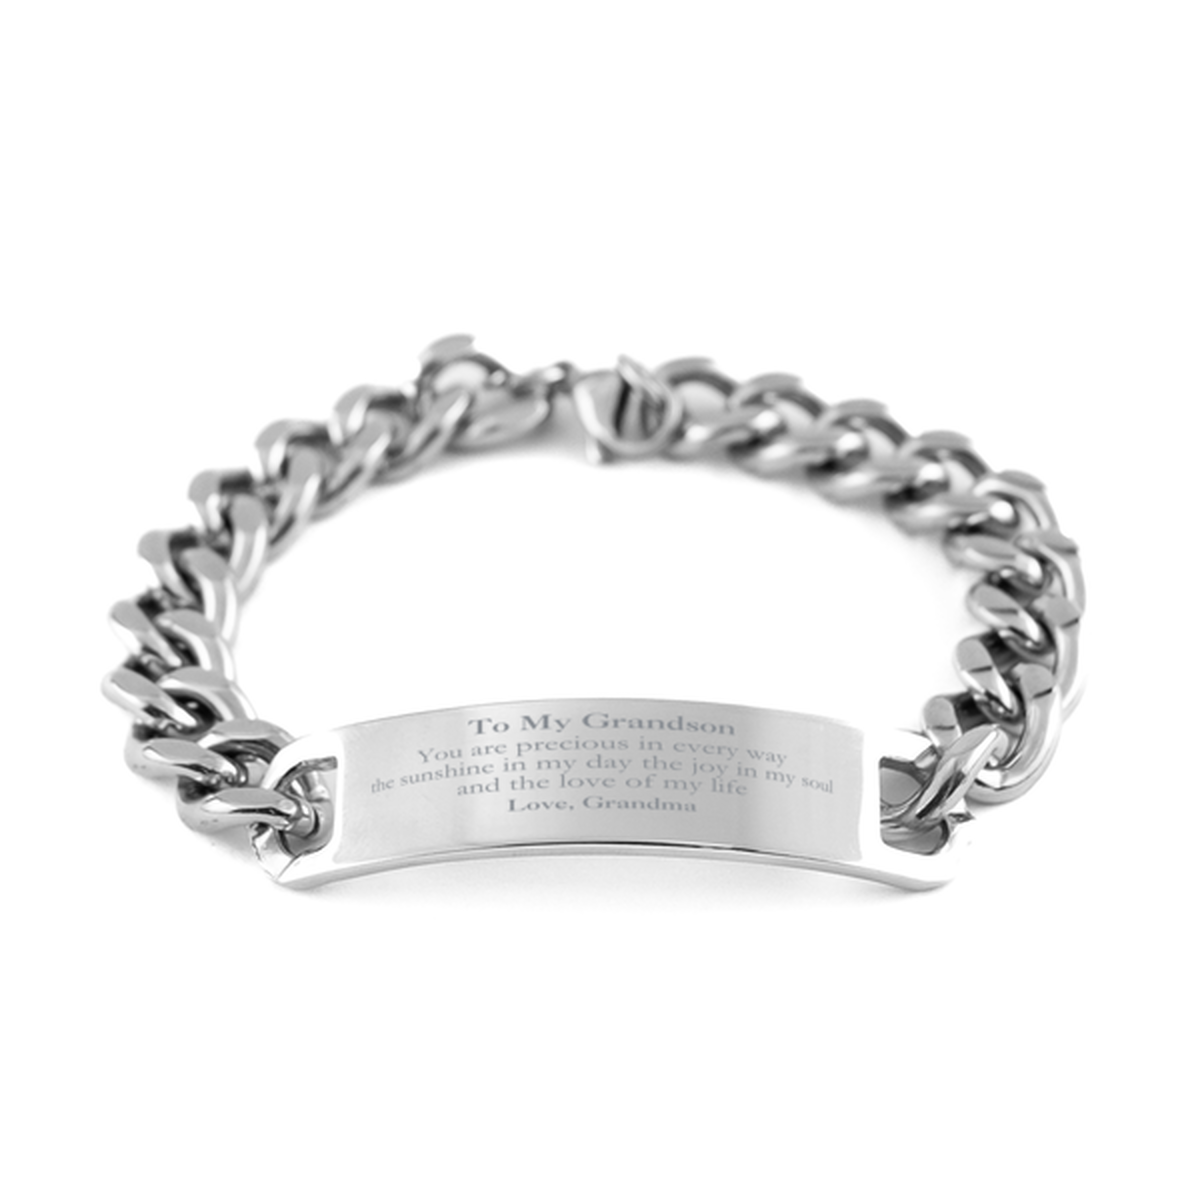 Graduation Gifts for Grandson Cuban Chain Stainless Steel Bracelet Present from Grandma, Christmas Grandson Birthday Gifts Grandson You are precious in every way the sunshine in my day. Love, Grandma